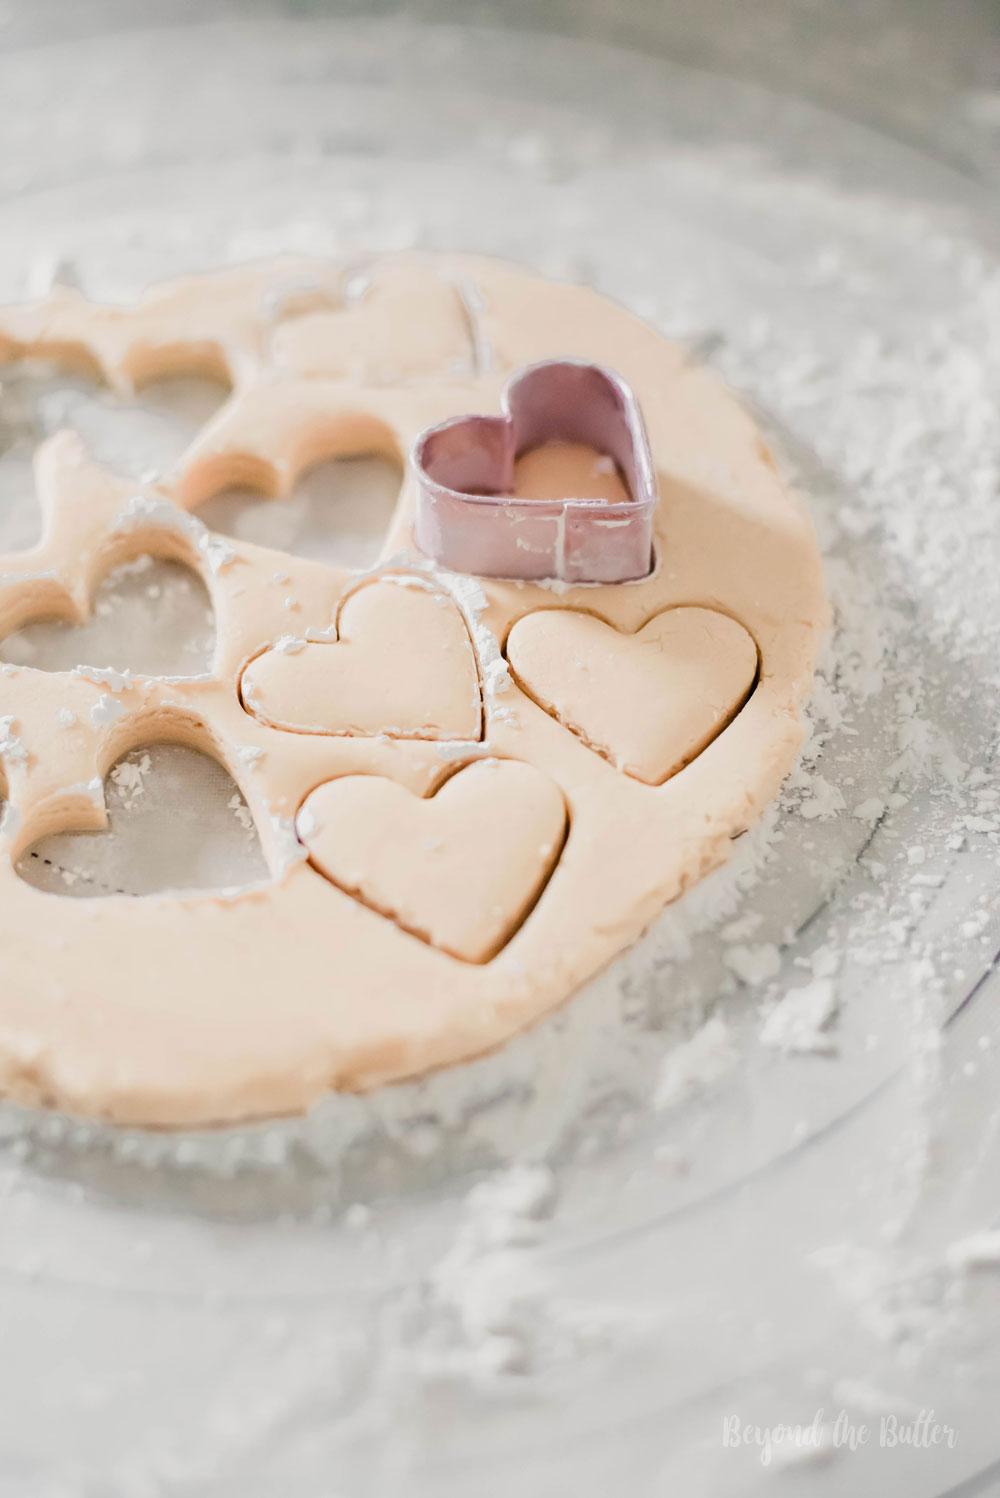 Chocolate Covered Peanut Butter Hearts | Cutting out peanut butter hearts with a small heart shaped cookie cutter | Image and Copyright Policy: Beyond the Butter, LLC